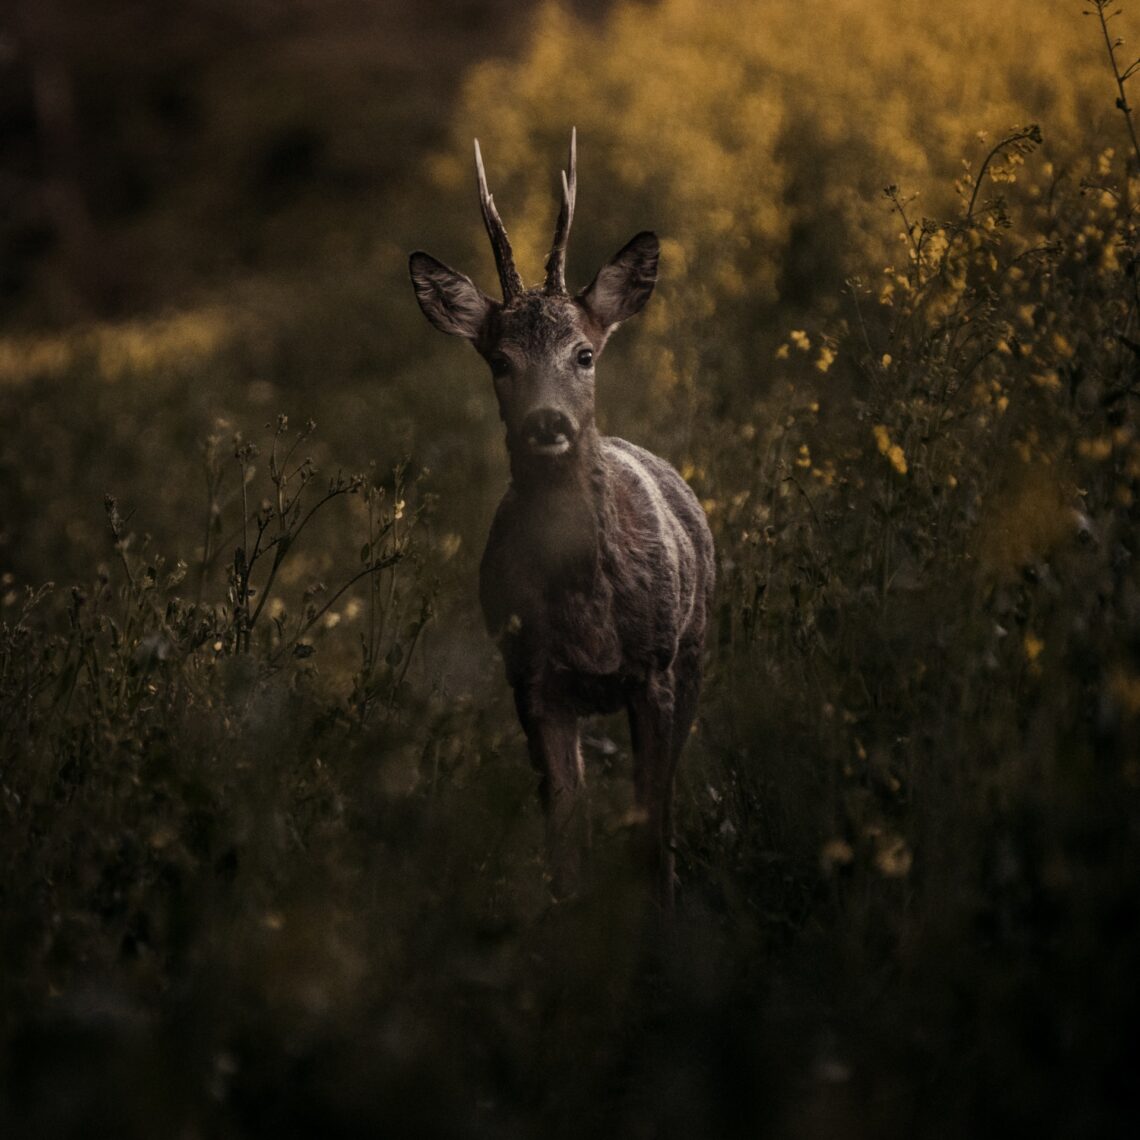 A Life Lived With Animals: image of a roe deer, representing the remains of animals found amongst the cremation remains of a young man in a Bronze Age burials site, and signs of a life lived with animals. Photo by Enguerran Urban on Unsplash